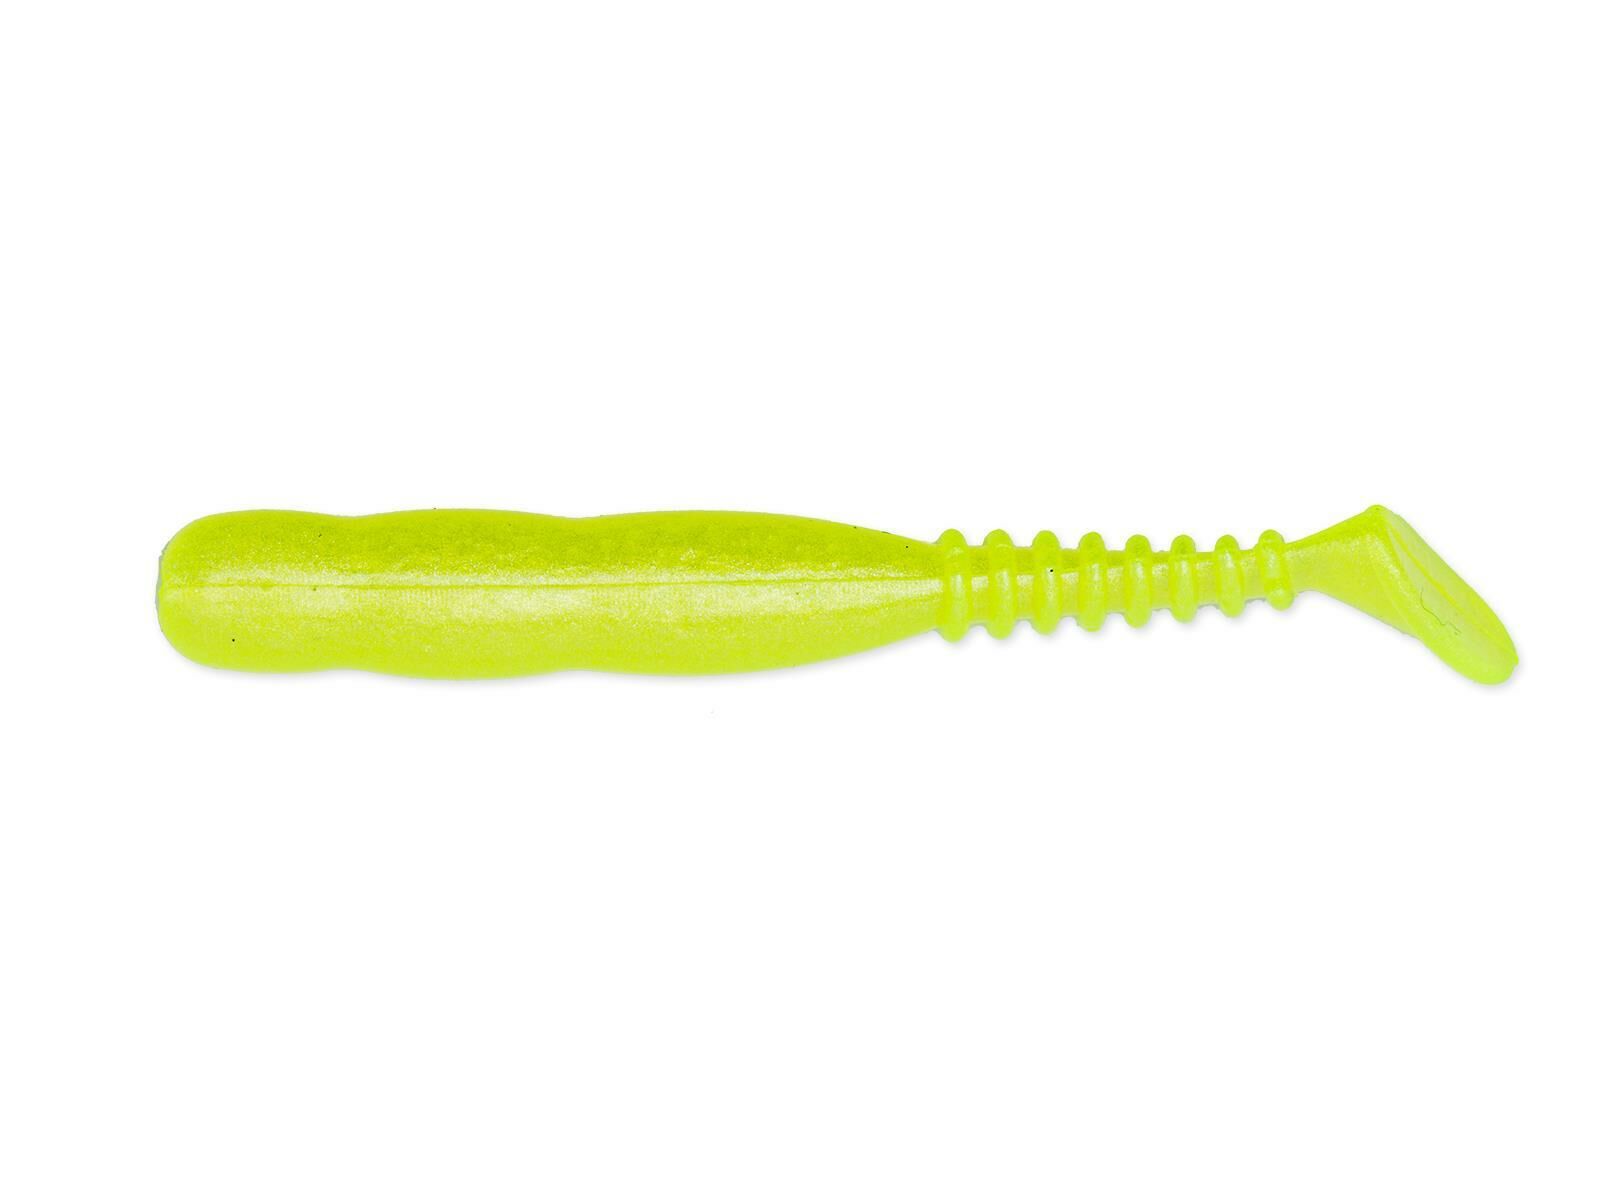 2" Rockvibe Shad - Chartreuse Pearl (No Scent)